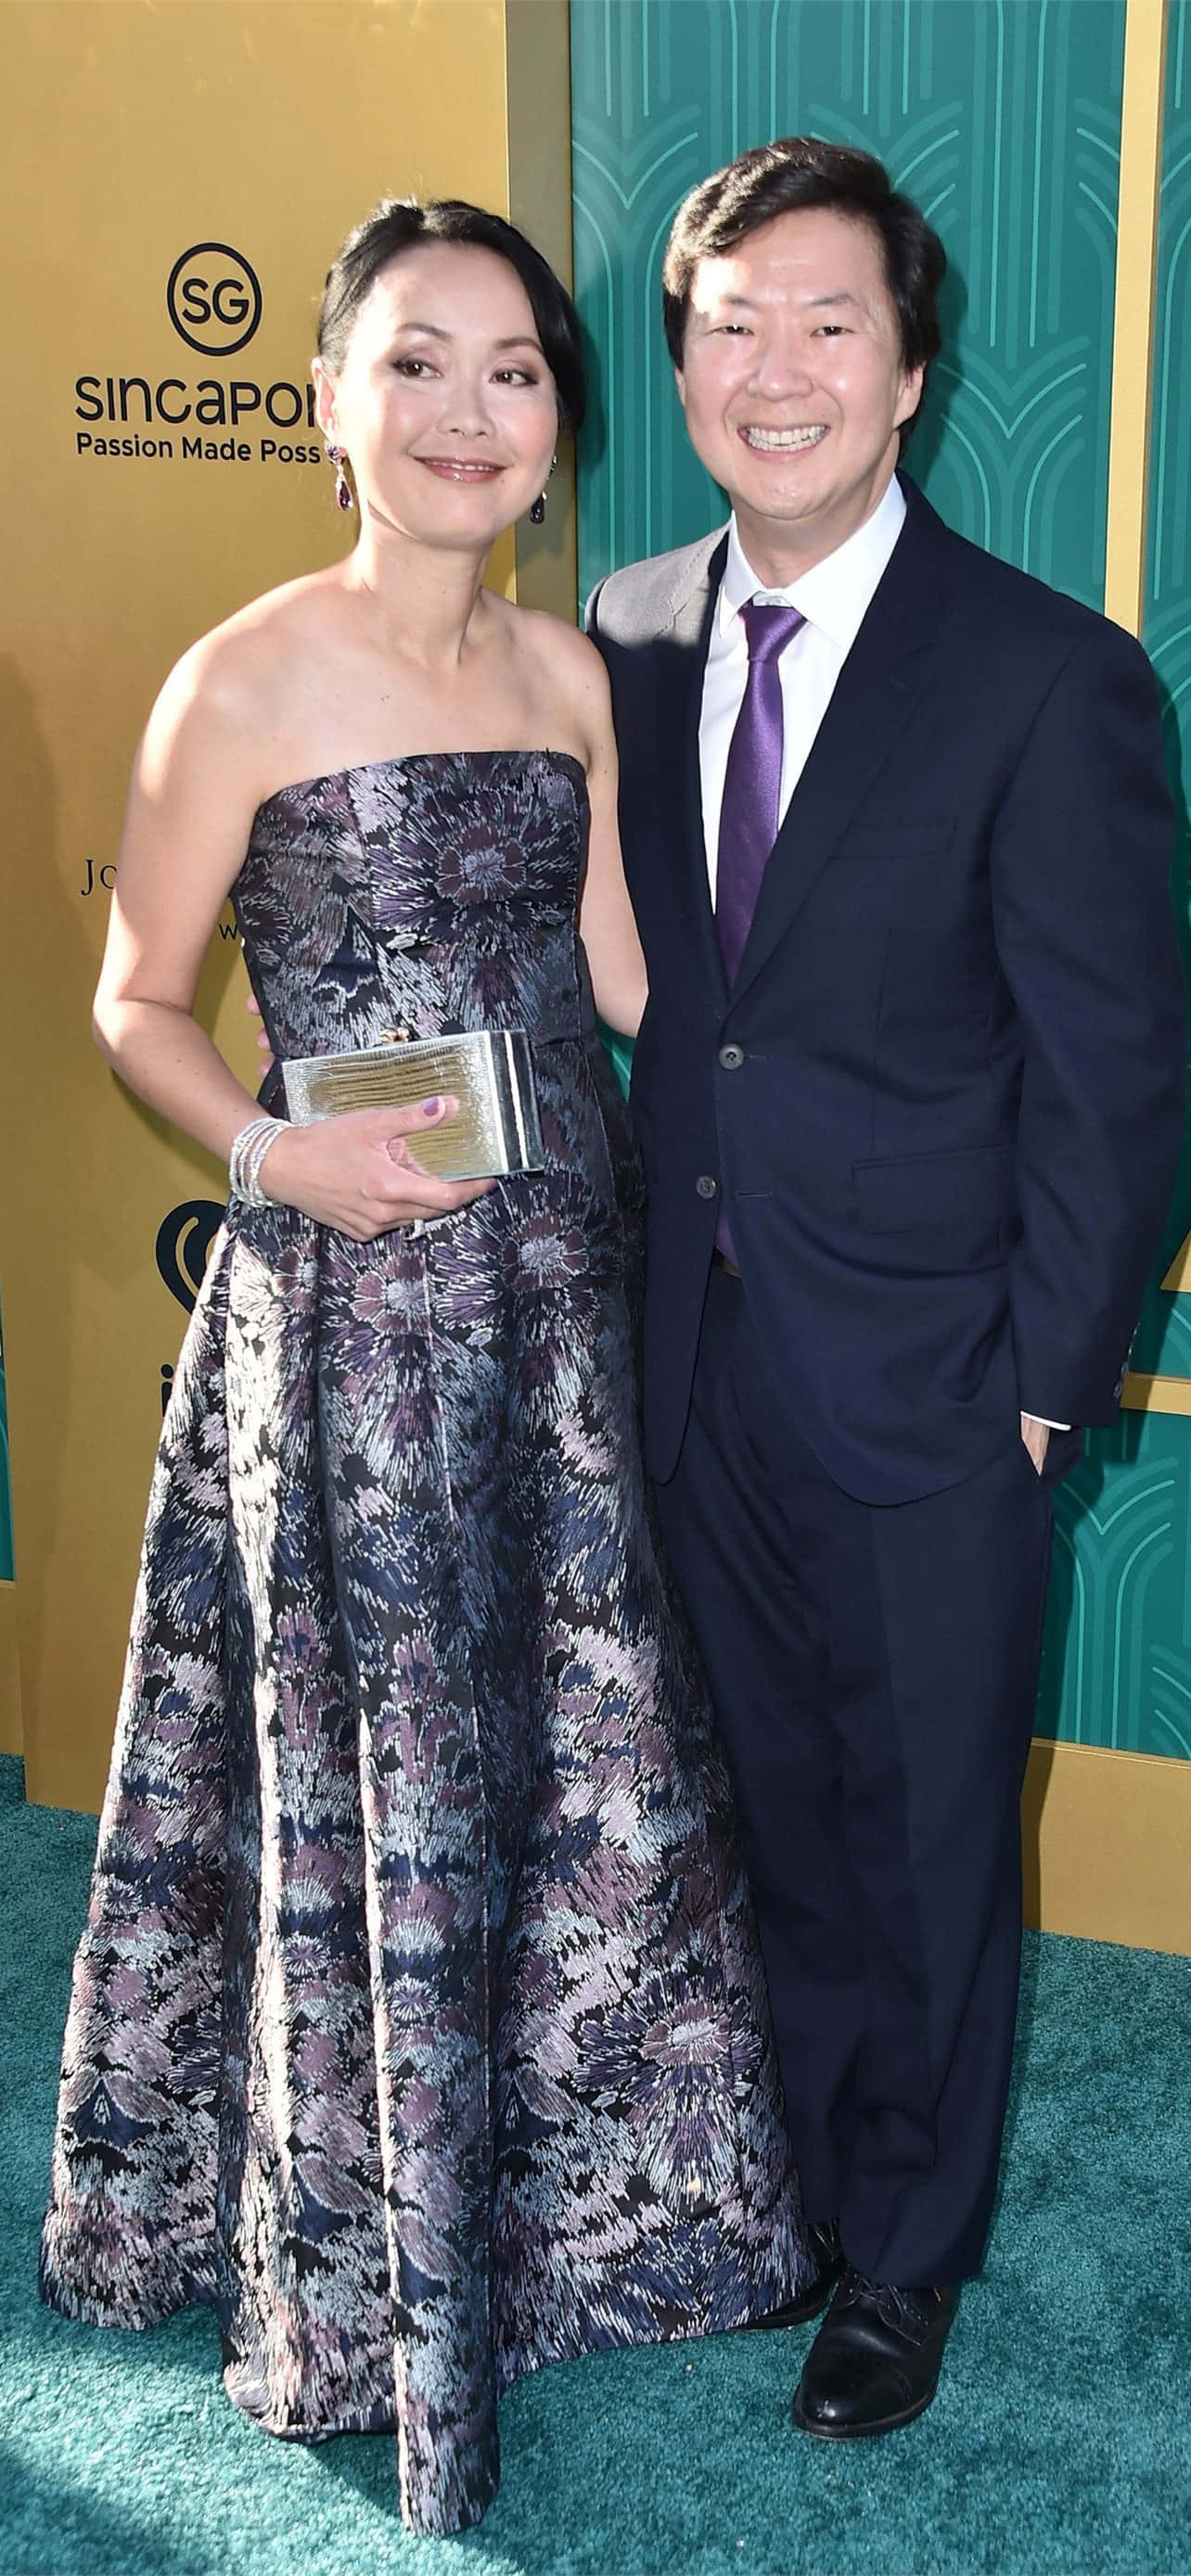 A Man And Woman Standing On A Green Carpet